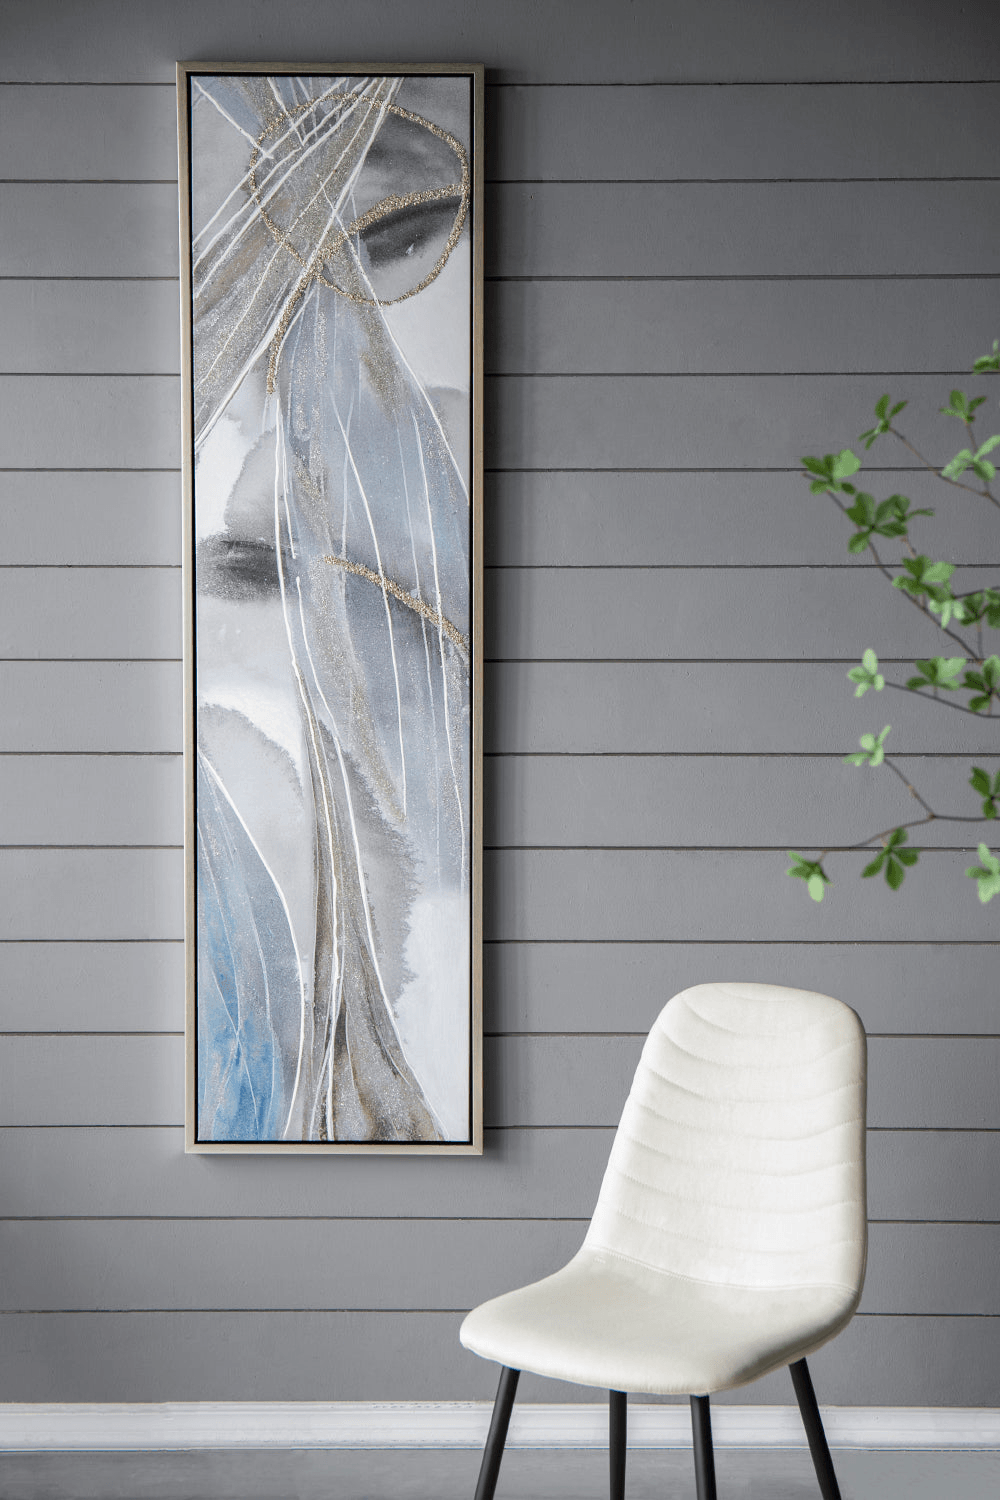 Set of 2 Elongated Modern Abstract Oil Paintings, Wall Art for Living Room Dining Room Bedroom Office Entryway, 20" x 71" - Loomini